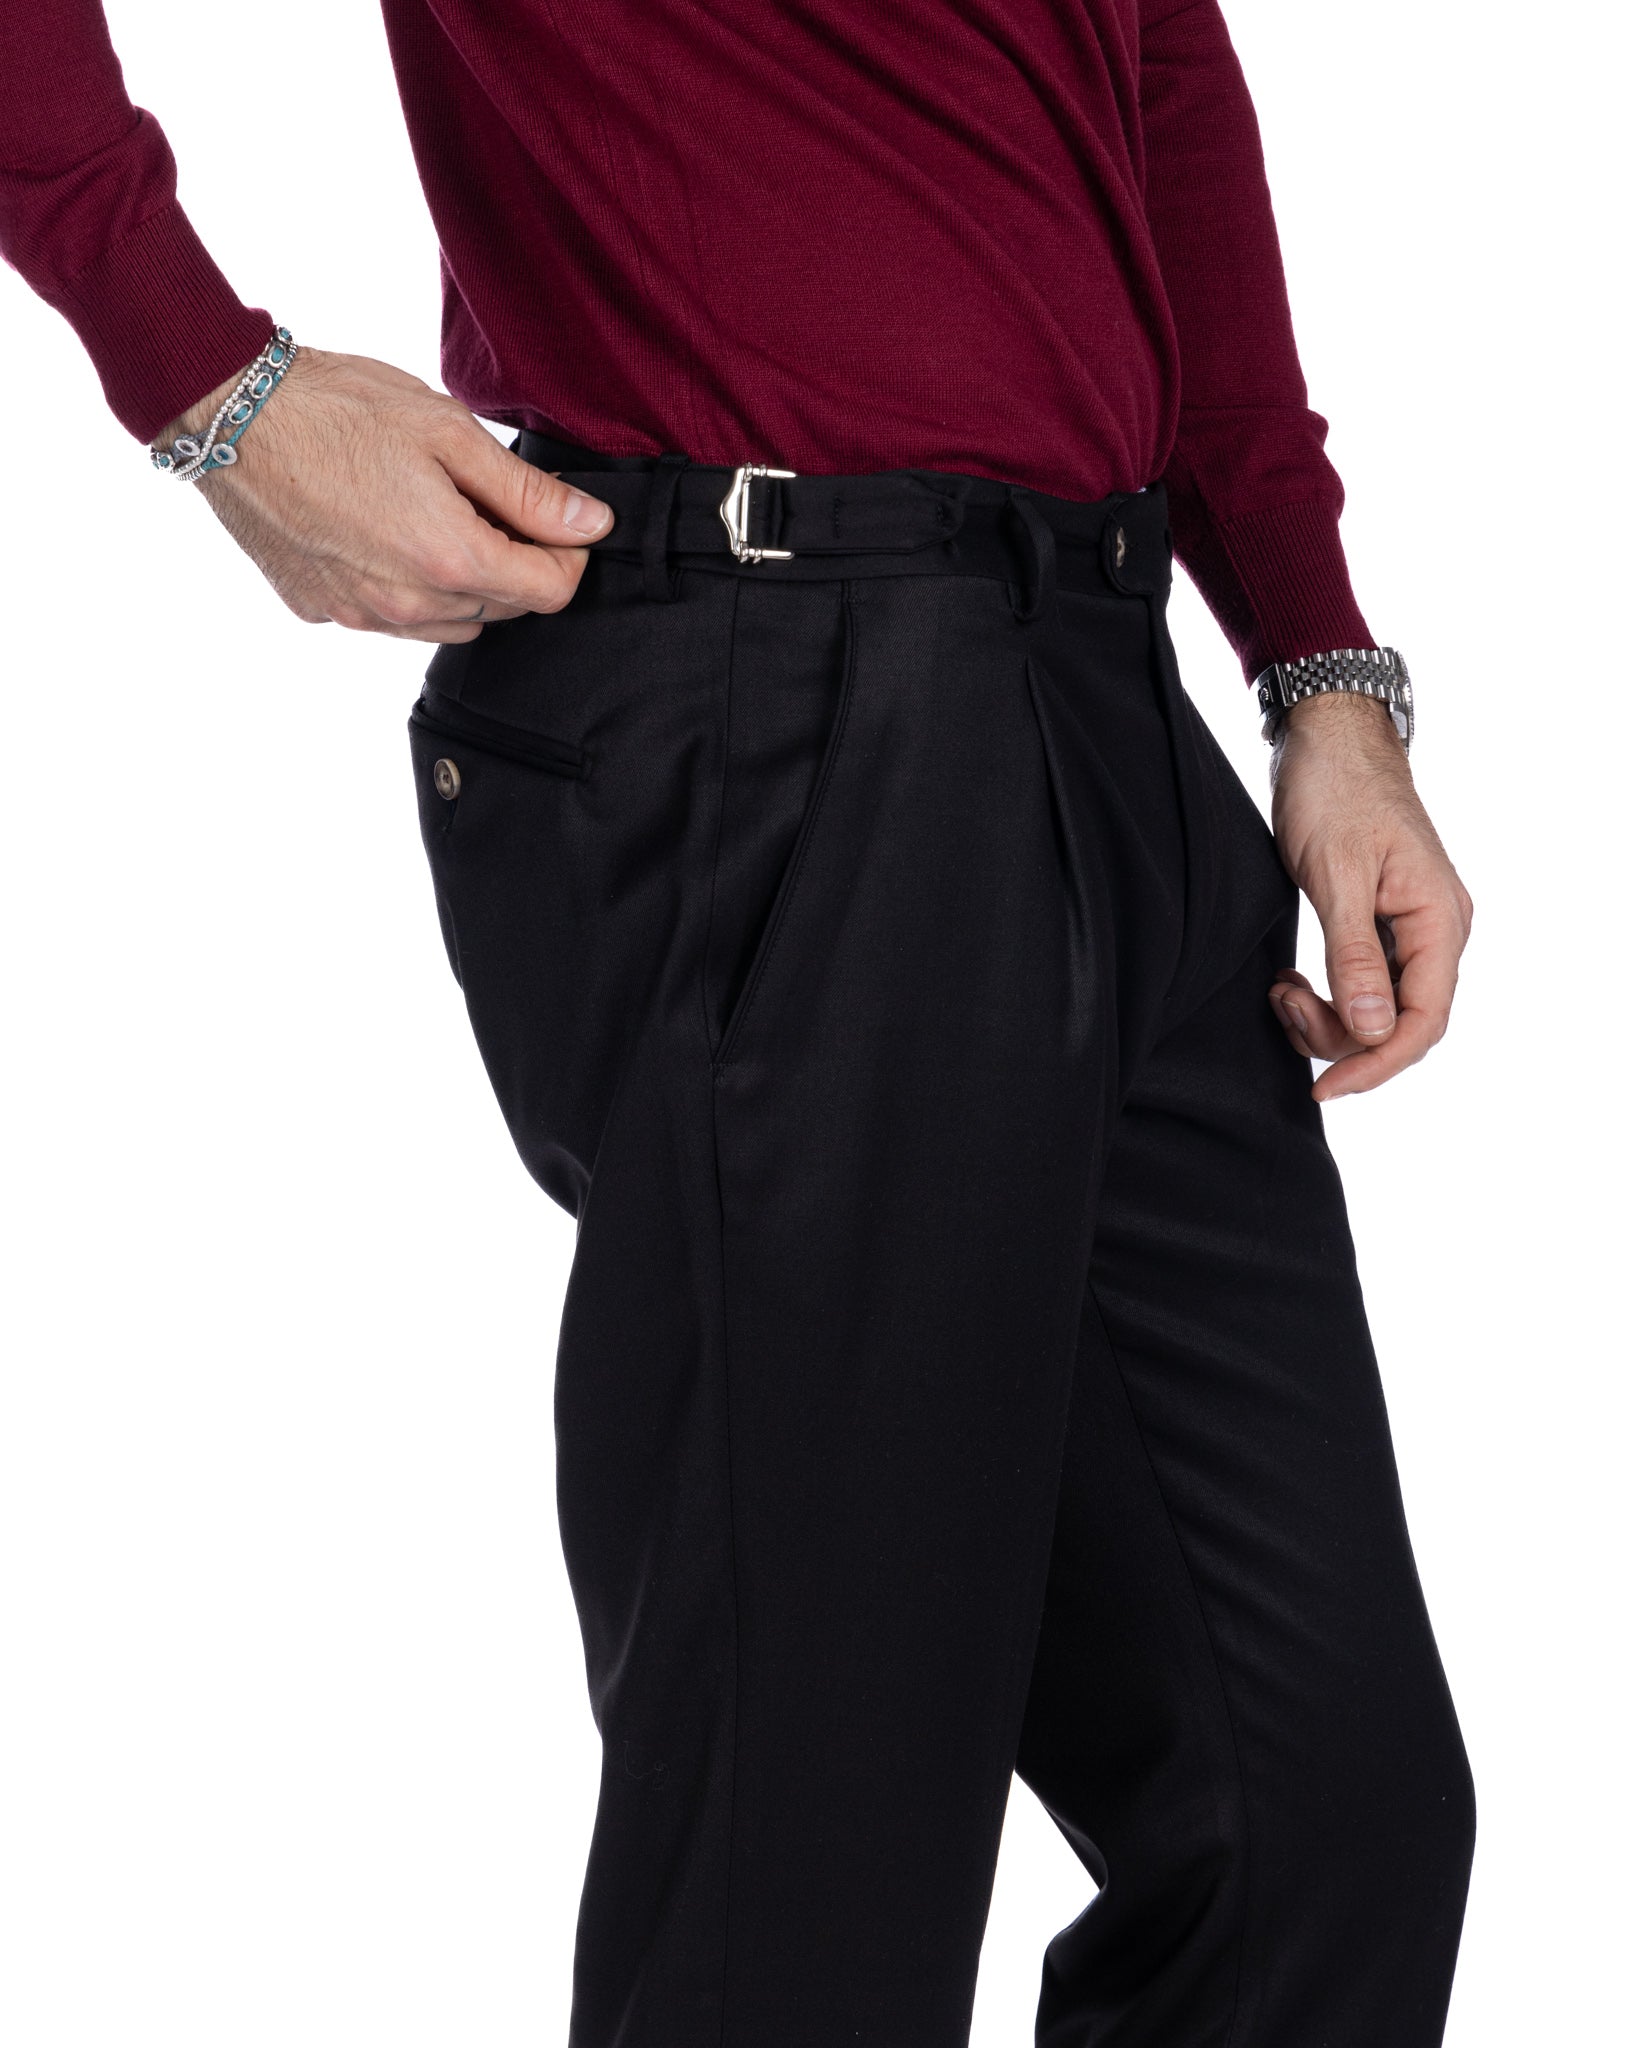 Monopoli - trousers with black buckles